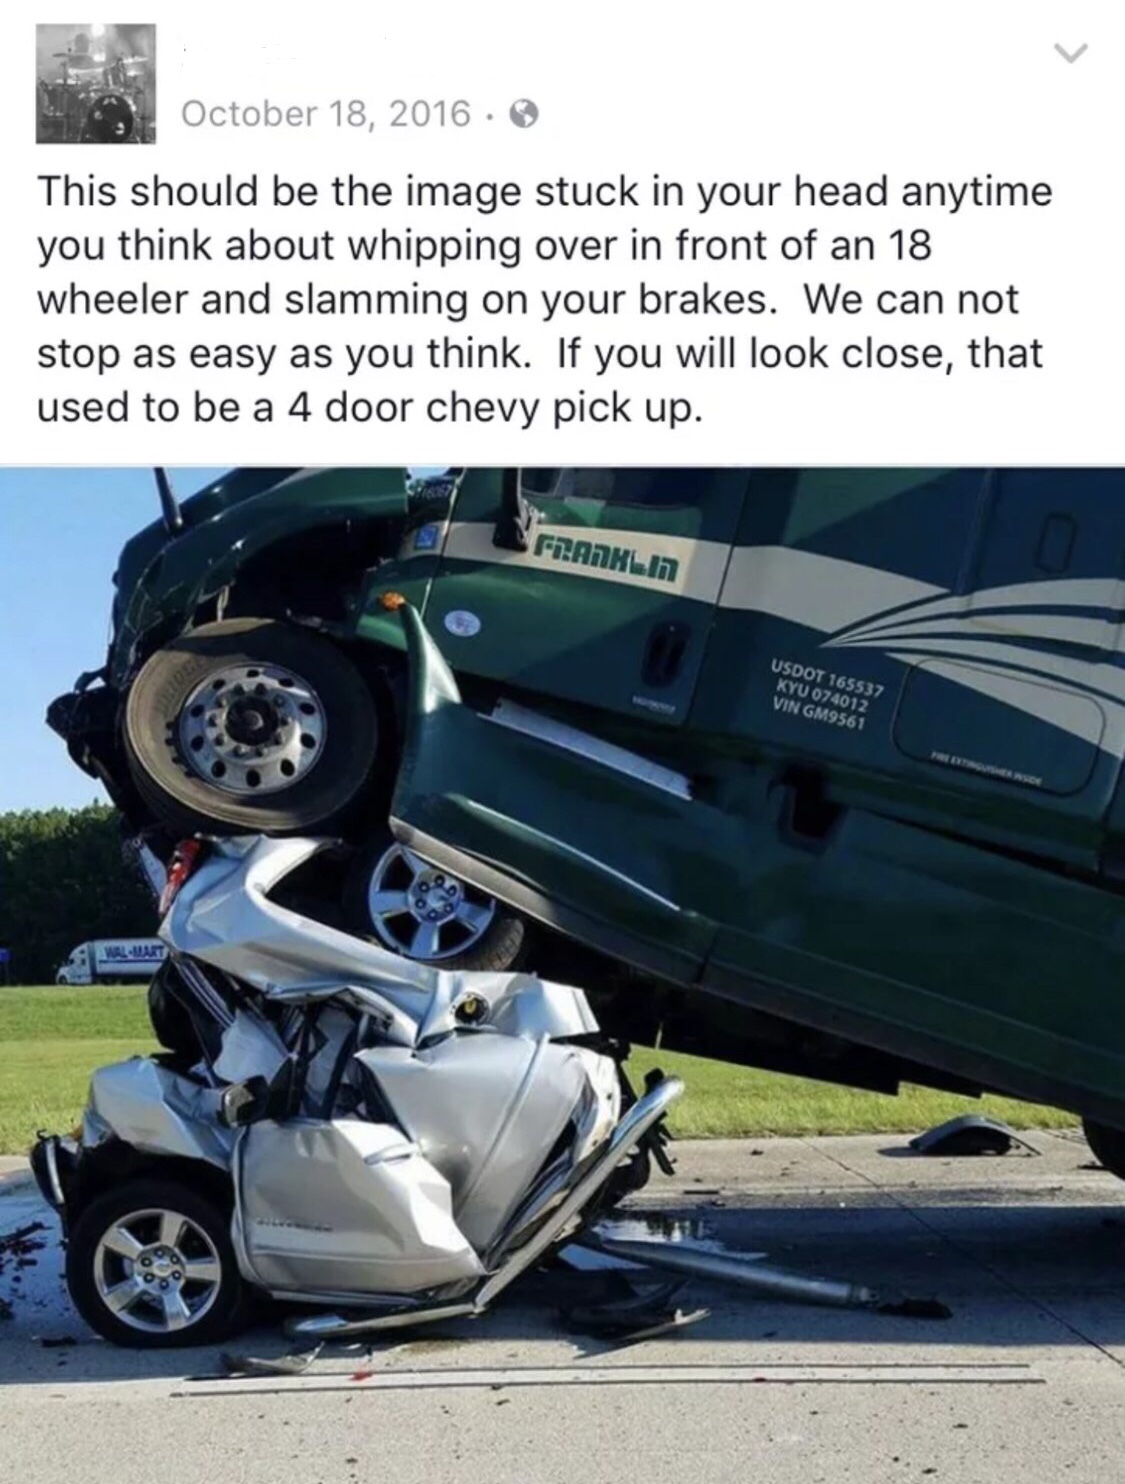 brake check 18 wheeler - . This should be the image stuck in your head anytime you think about whipping over in front of an 18 wheeler and slamming on your brakes. We can not stop as easy as you think. If you will look close, that used to be a 4 door chev